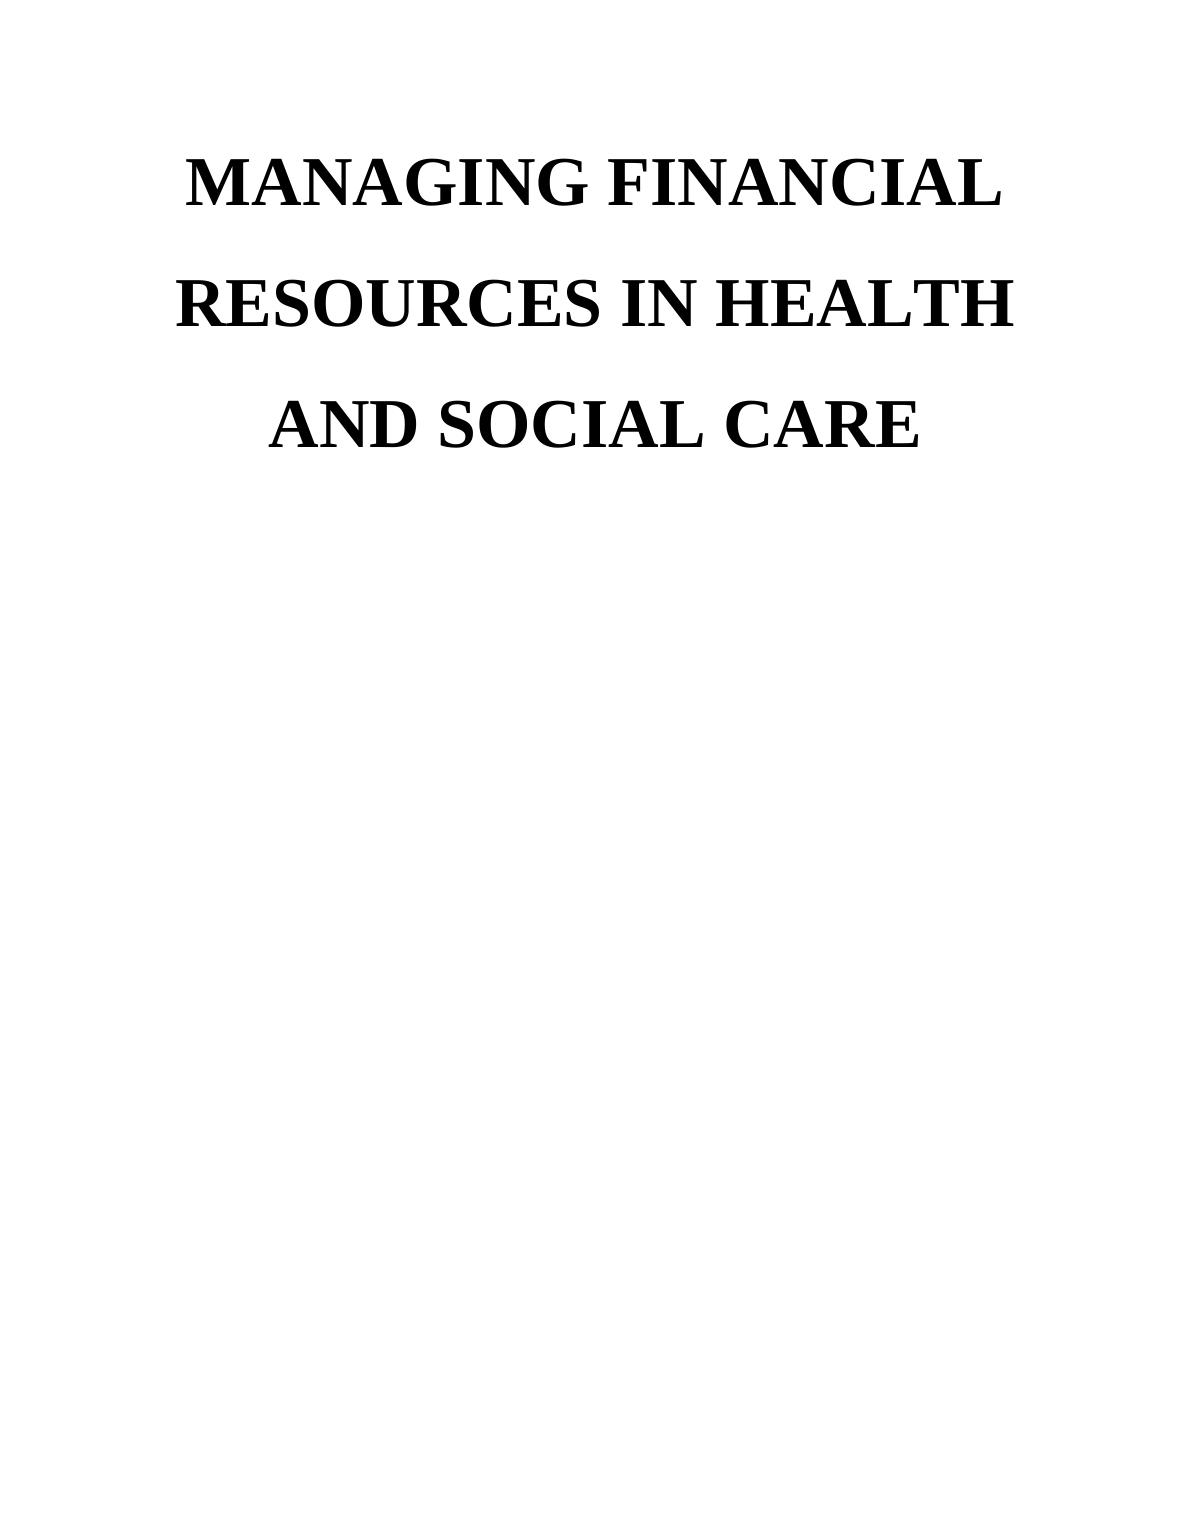 Managing Financial Resources in Healthcare and Social Care TABLE OF CONTENTS INTRODUCTION 1 TASK 11_1